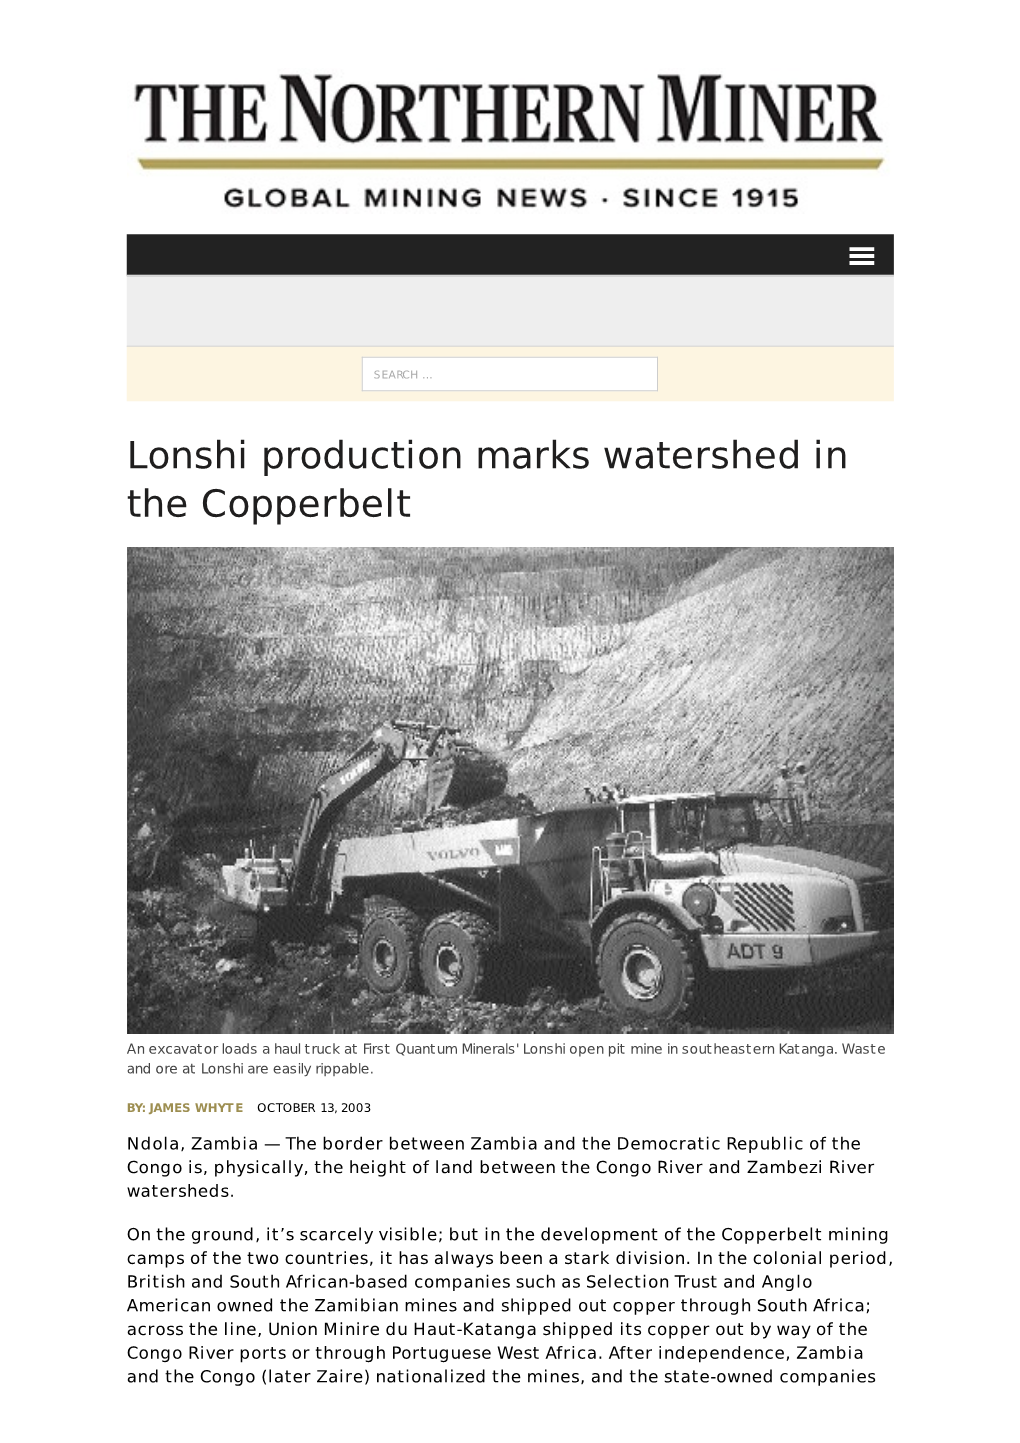 Lonshi Production Marks Watershed in the Copperbelt